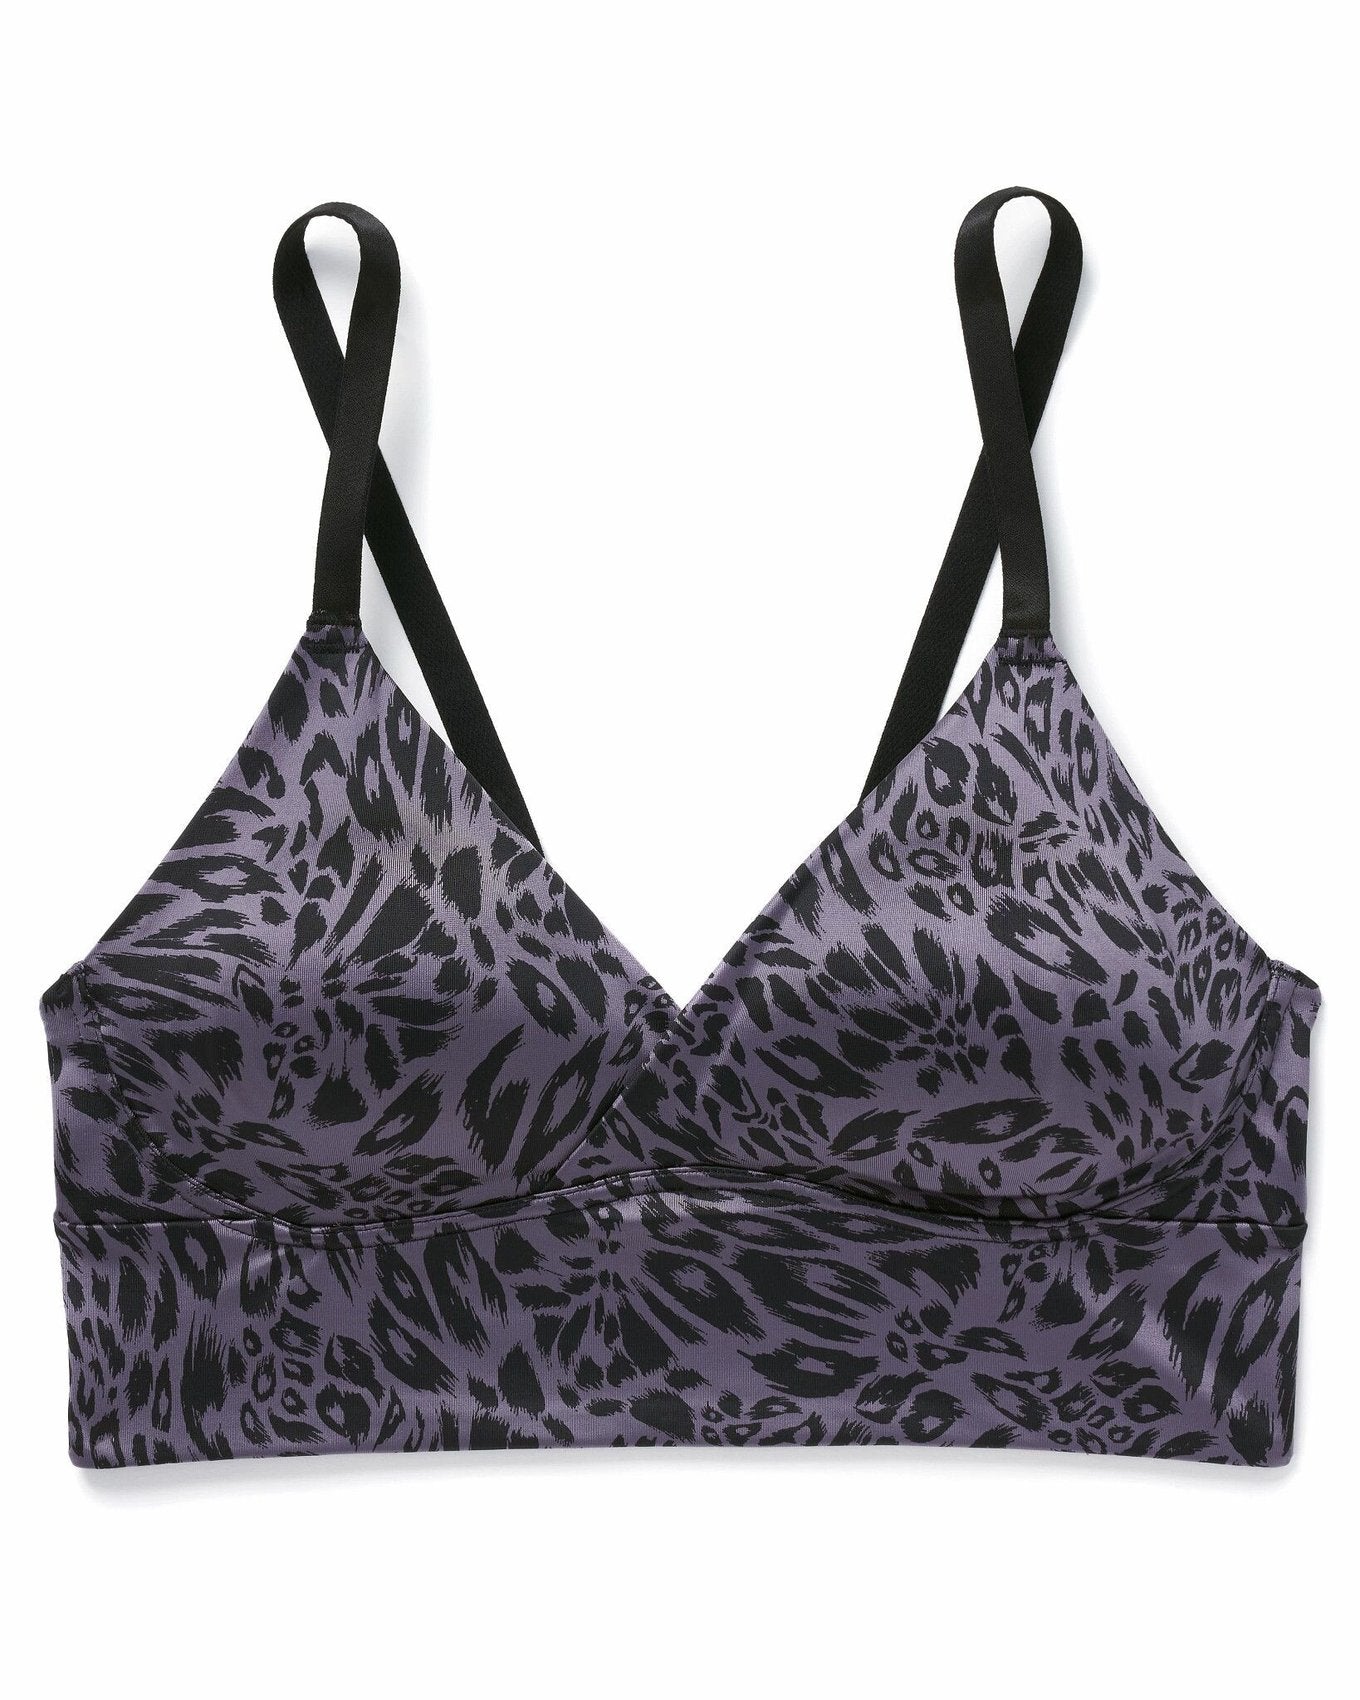 Adore Me Kali Low-Impact Sports Bra in color Feisty Leopard C02 and shape sports bra